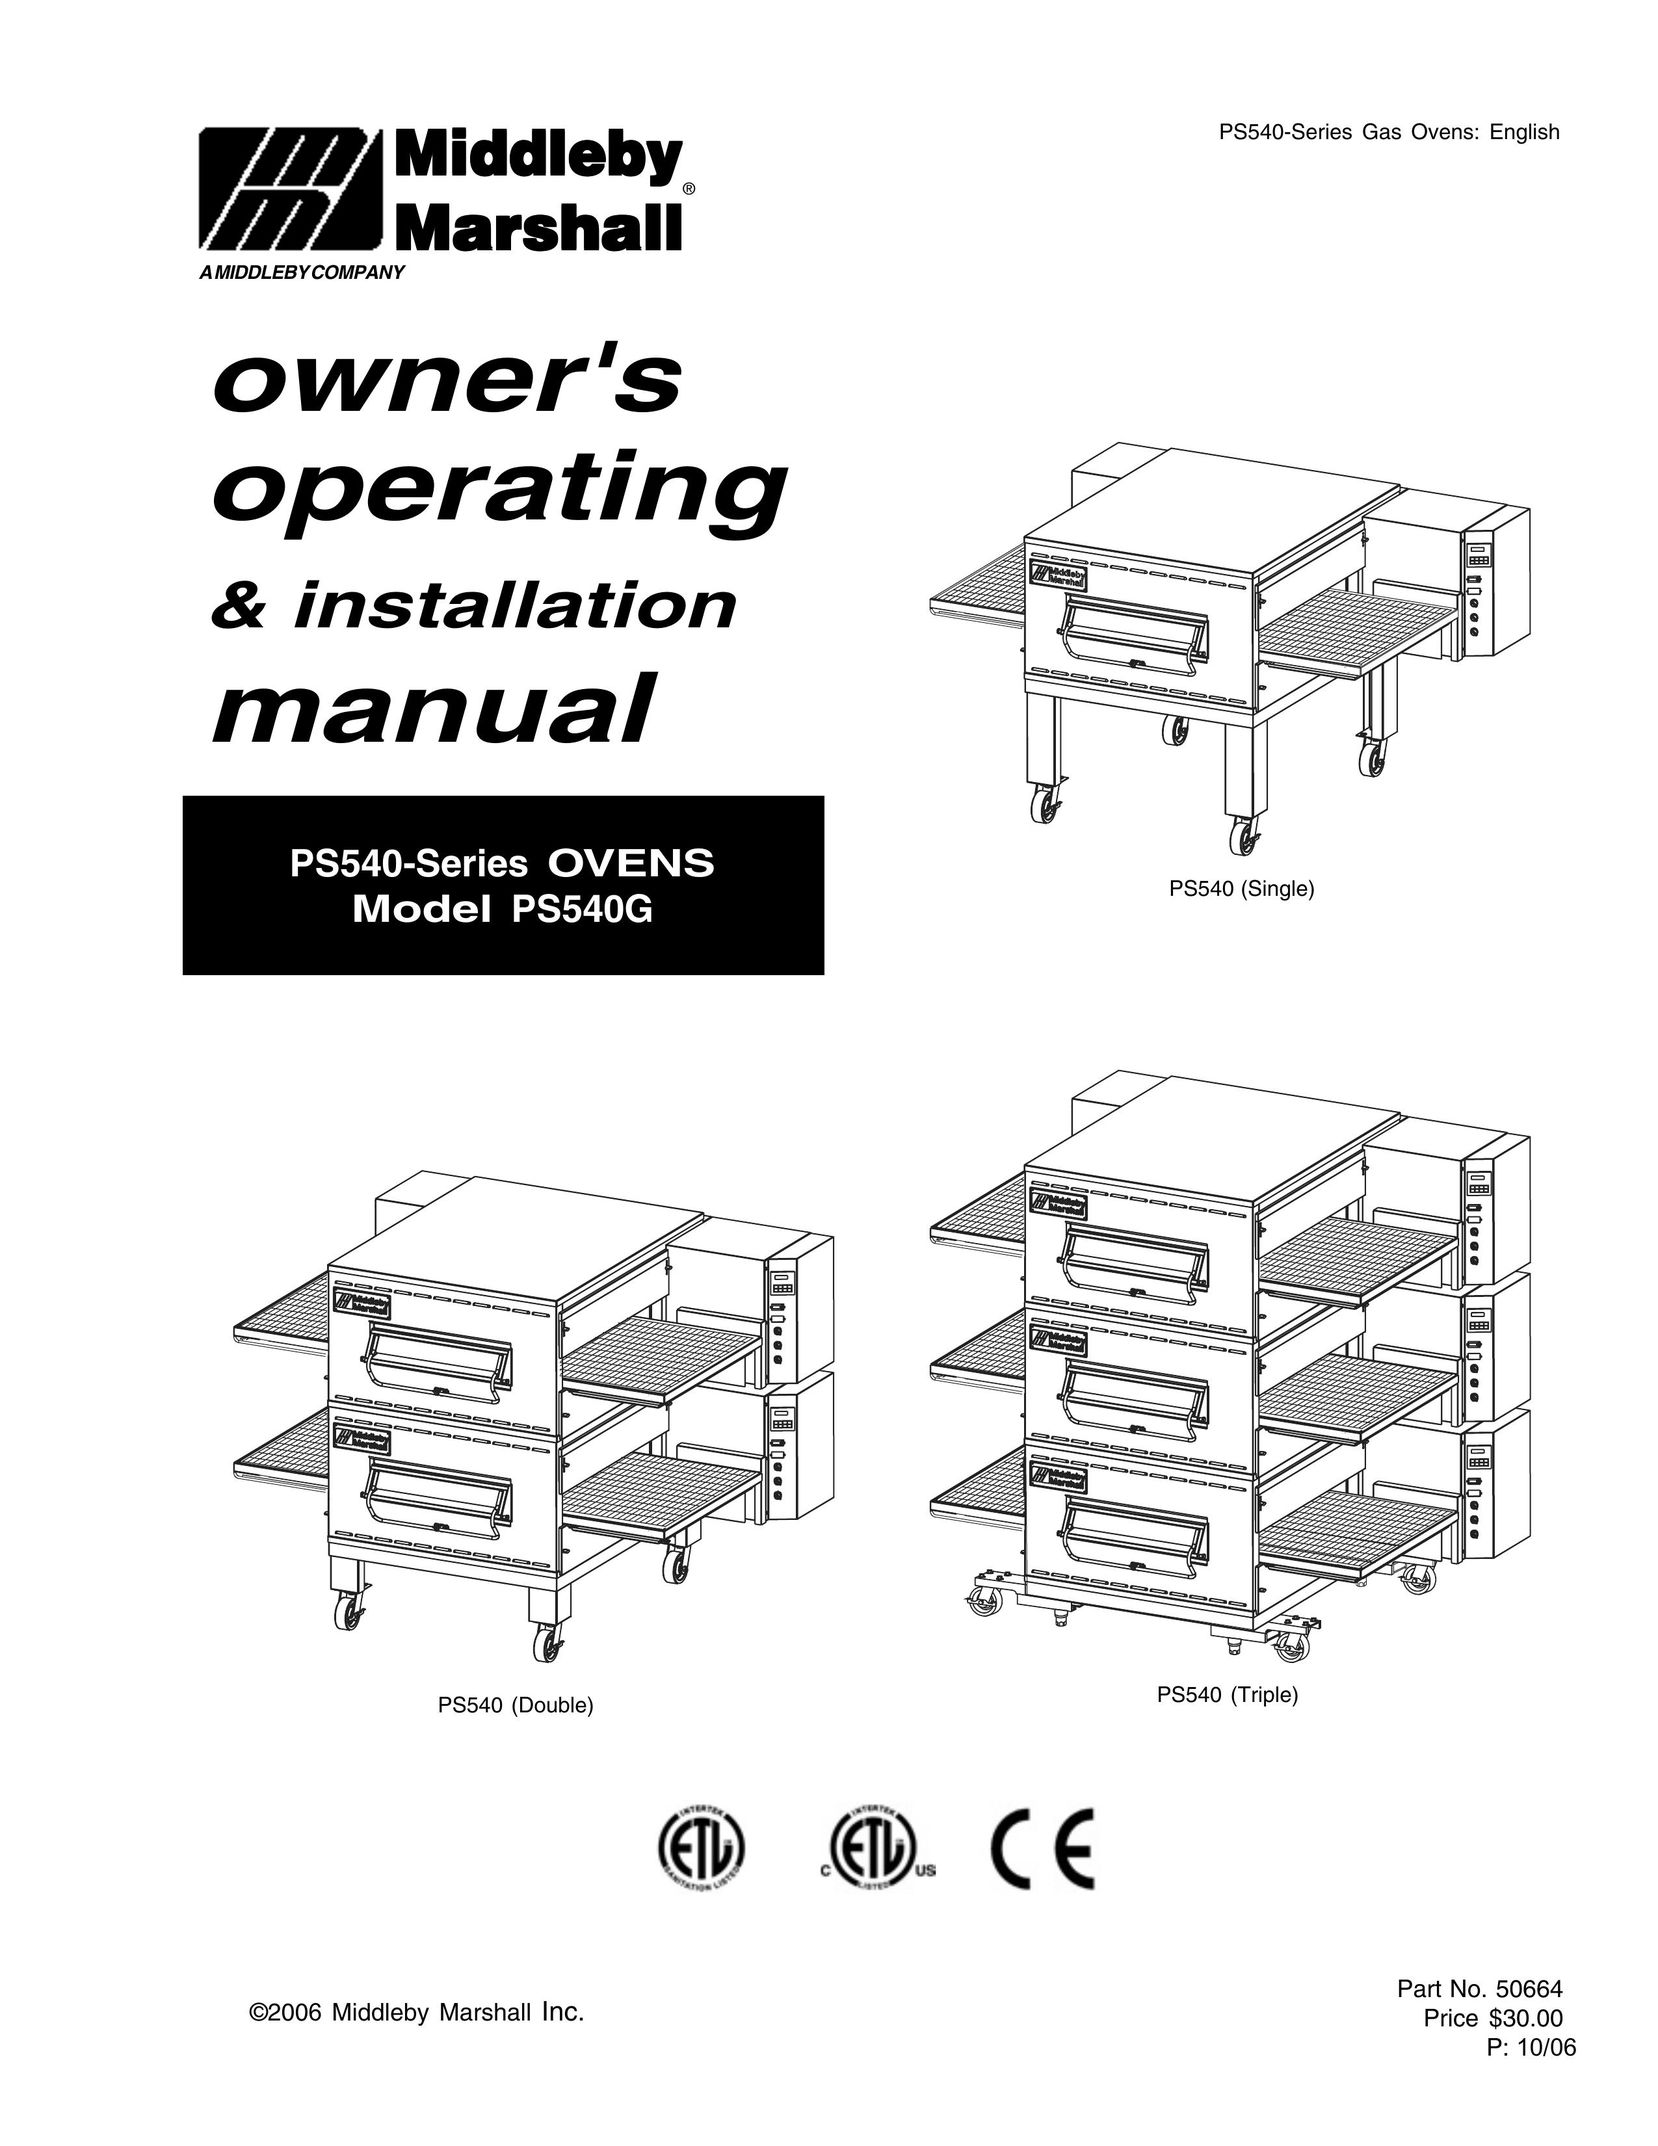 Middleby Marshall PS540 Oven User Manual